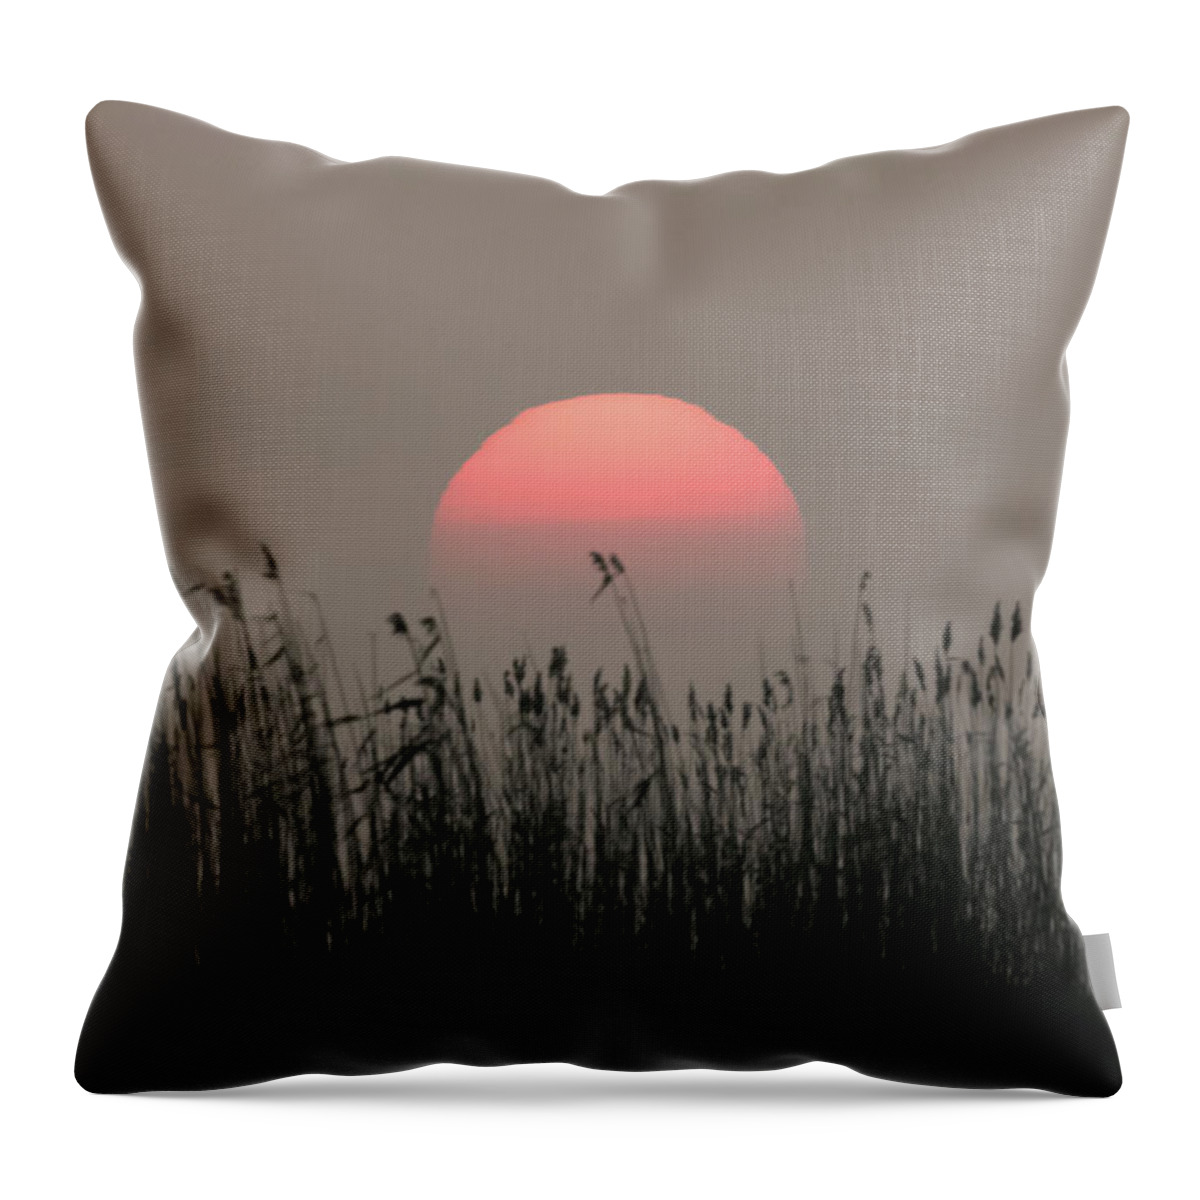 Flyladyphotographybywendycooper Throw Pillow featuring the photograph Sundown #1 by Wendy Cooper